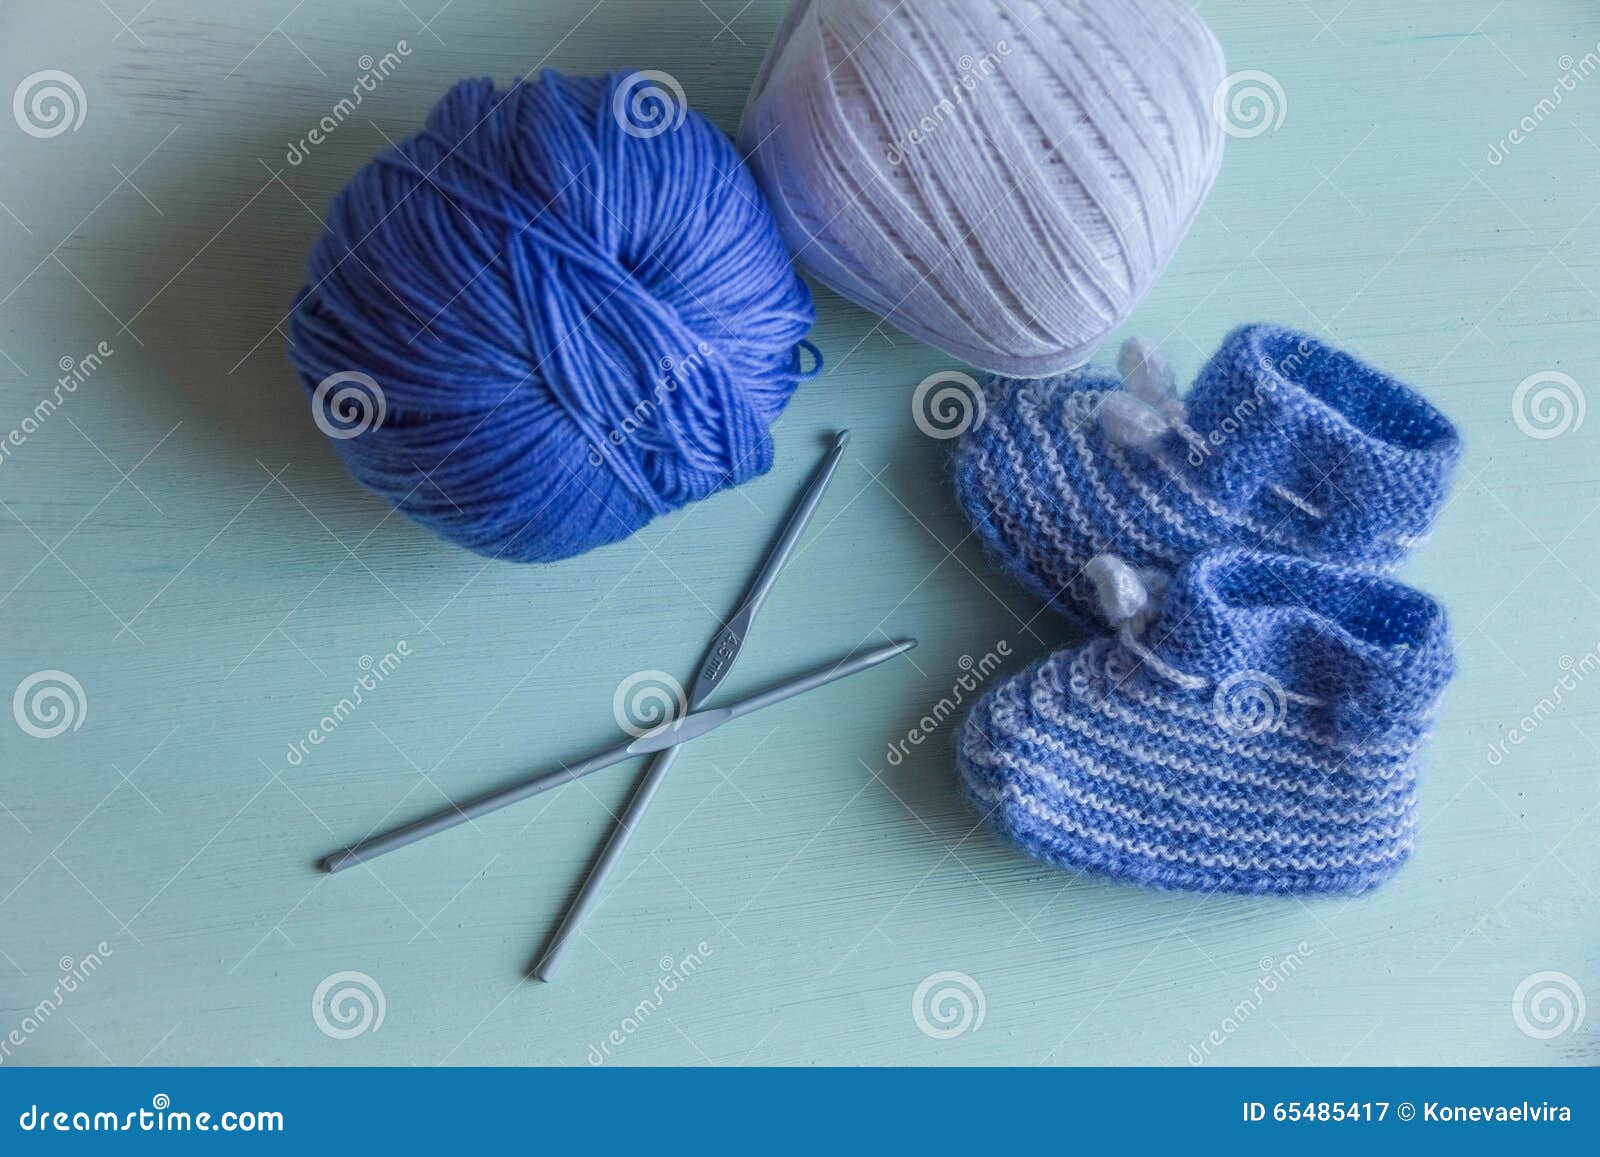 Knitting Baby Shoes with Blue and White Yarn Stock Image - Image of infant,  hobby: 65485417